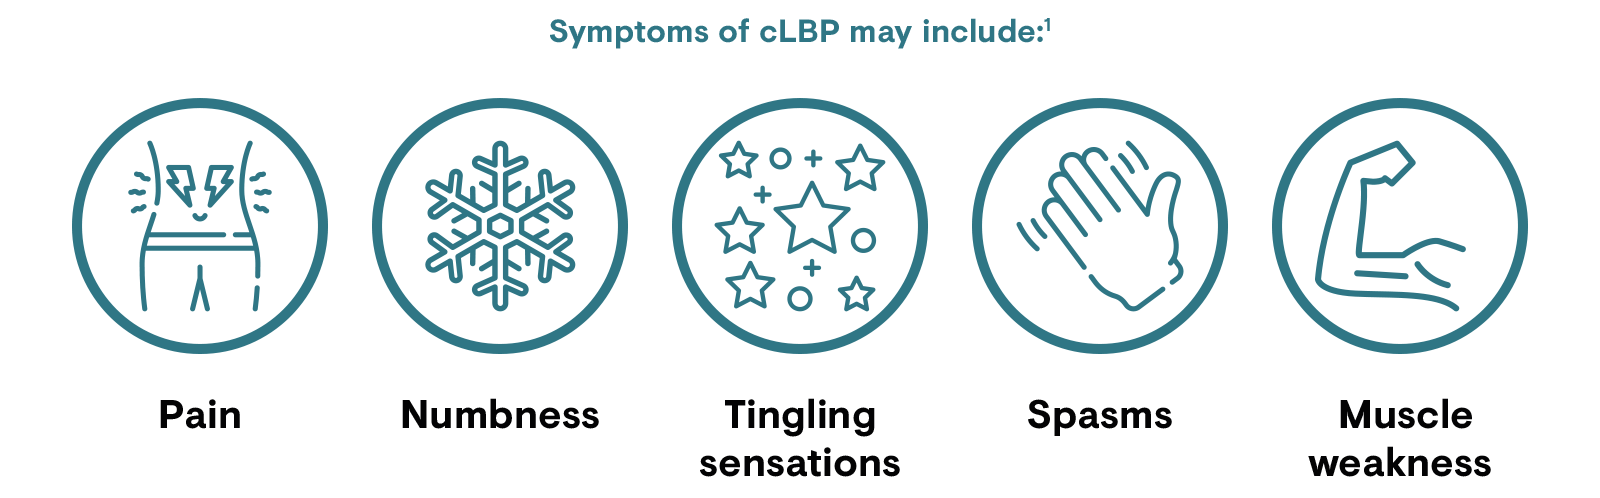 Symptoms of cLBP may include